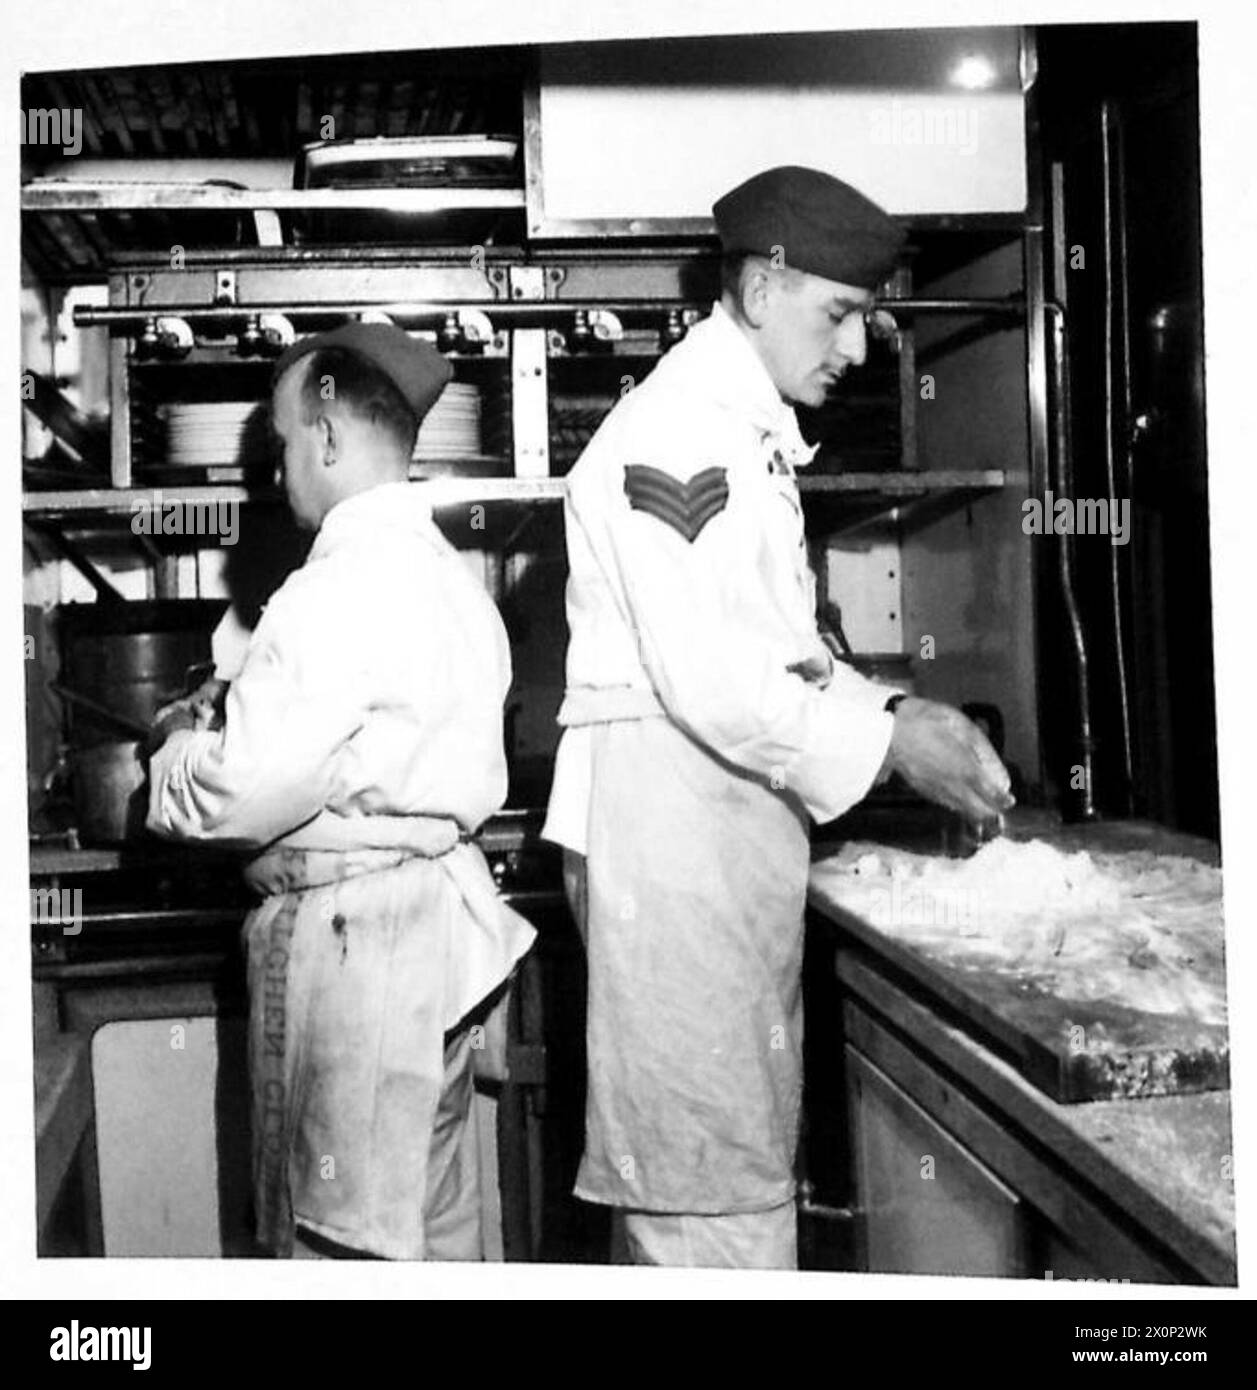 THE C-IN-C's SPECIAL TRAIN - Sergeant J.S. Benzie, A.C.C. of Aberdeen, a peacetime chef with the L.N.E.R. prepares dinner for the C-in-C and his guests. During two years on the train he has cooked for Lord Louis Mountbatten, Prince Olaf of Norway, General Eisenhower and many other distinguished guests. His assistant is Private C.J. Wright of Balham, who in civilian life is chef in a well known London restaurant. Photographic negative , British Army Stock Photo